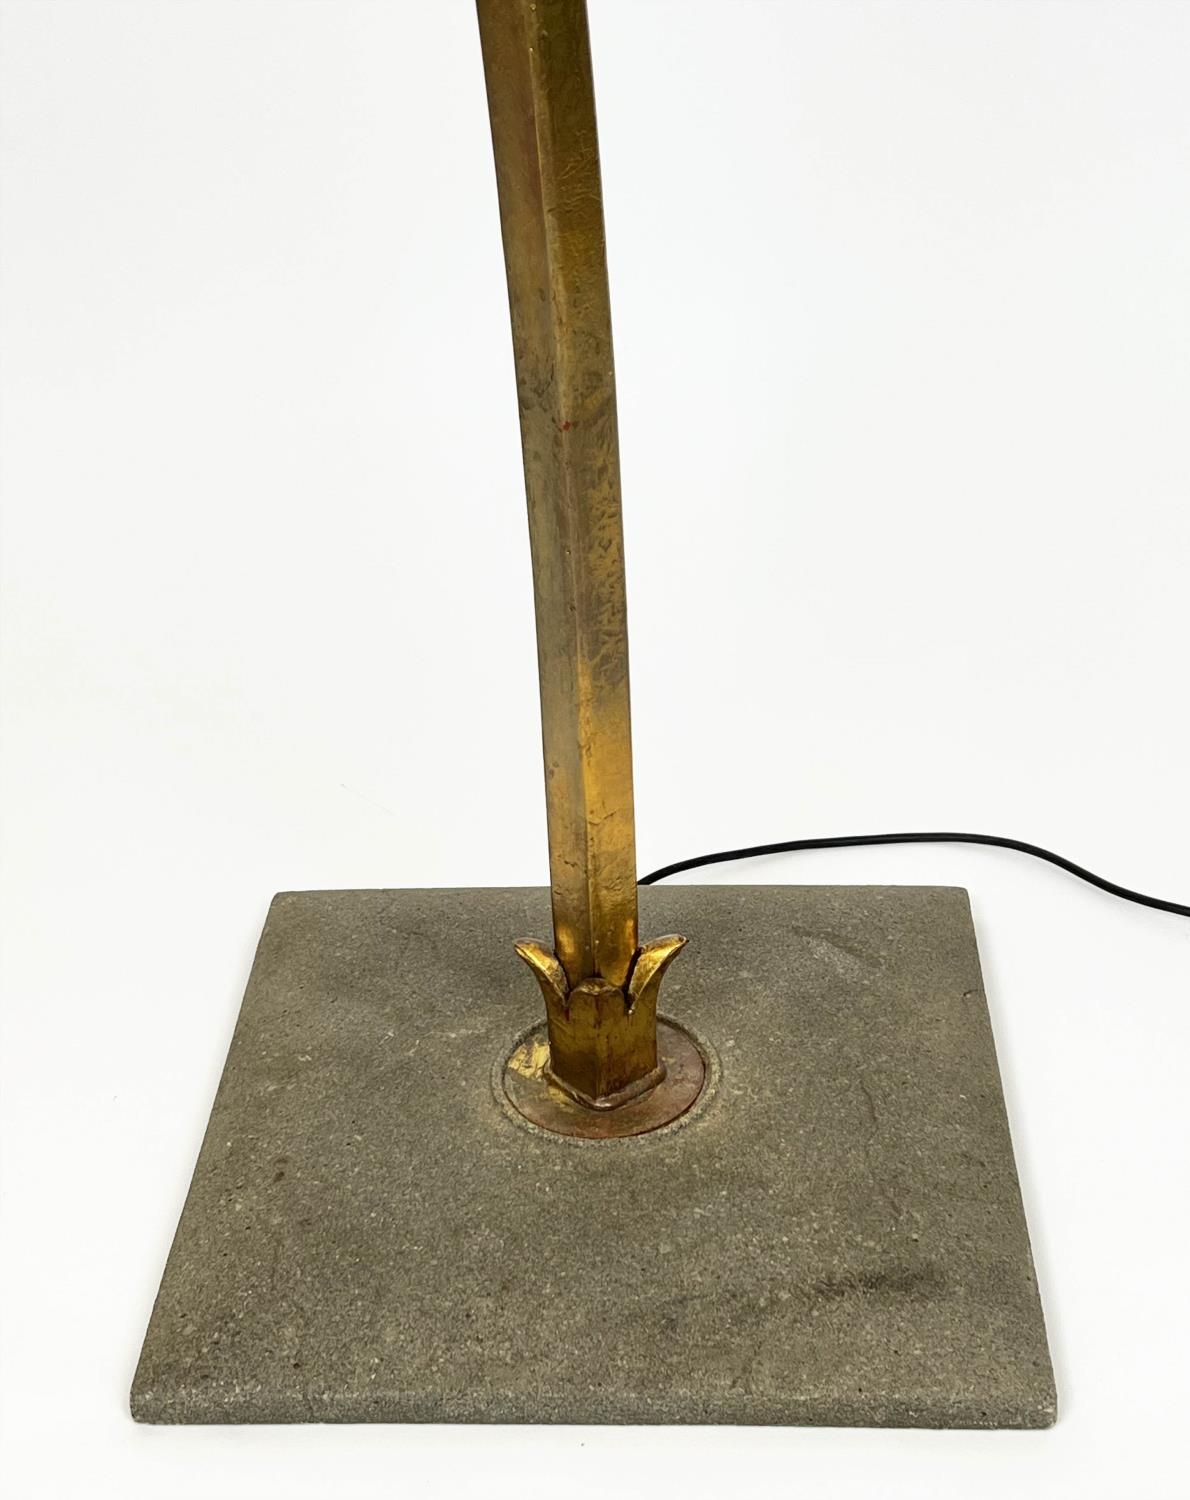 ALFEA FLOOR LAMP, designed by Enzo Ciampalini, circa 1970s, gilt metal with a Murano glass shade, - Image 4 of 5